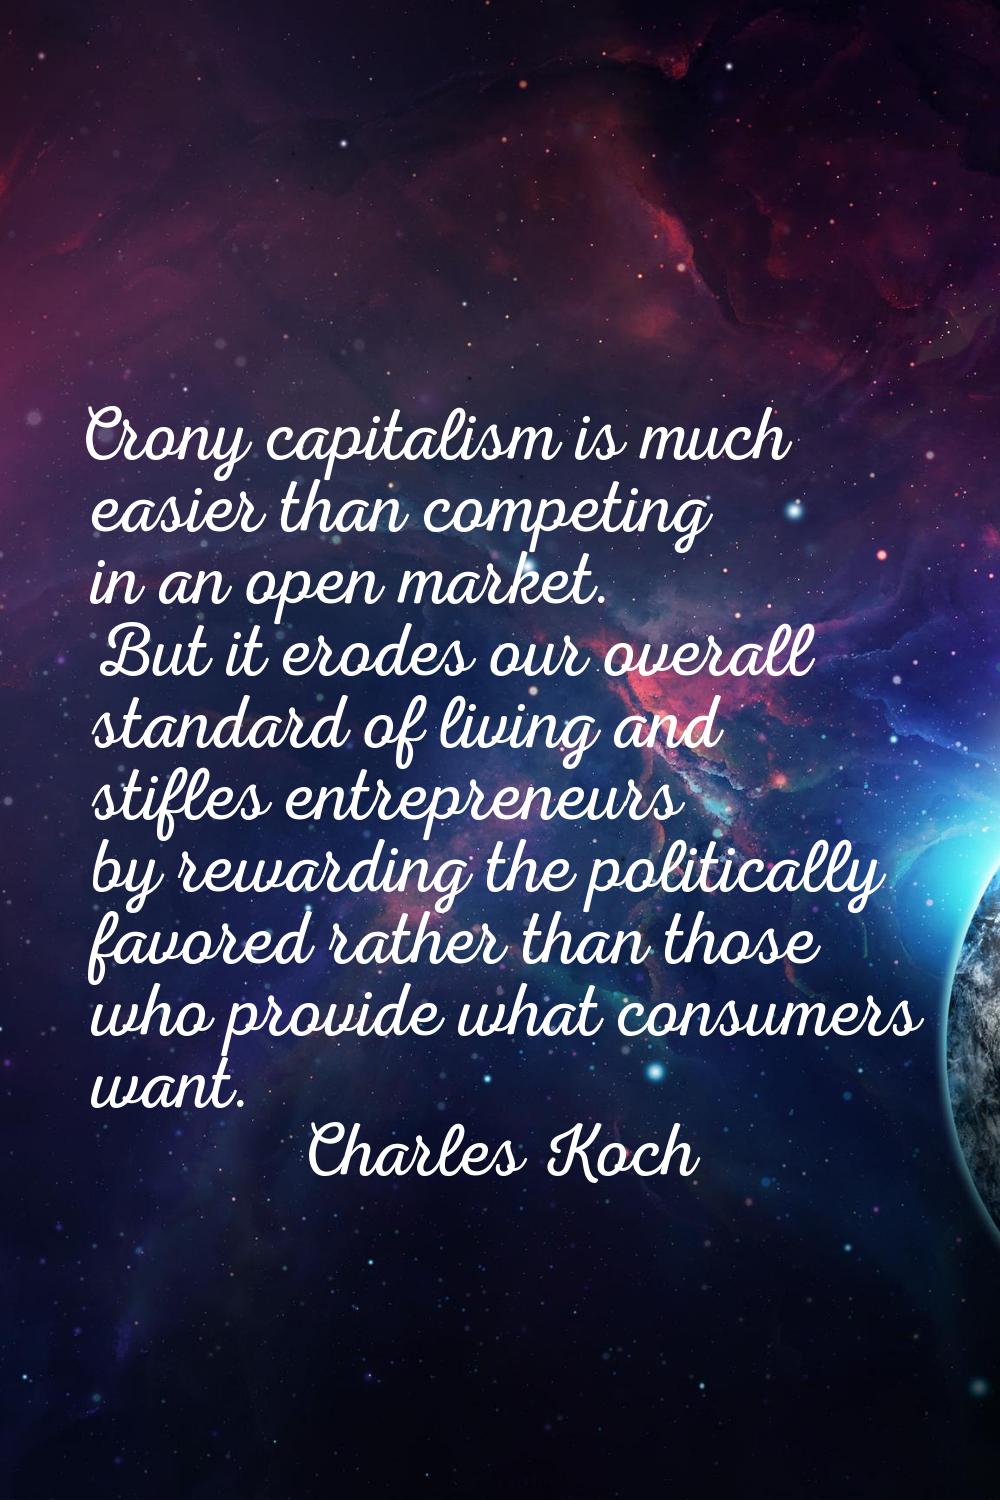 Crony capitalism is much easier than competing in an open market. But it erodes our overall standar